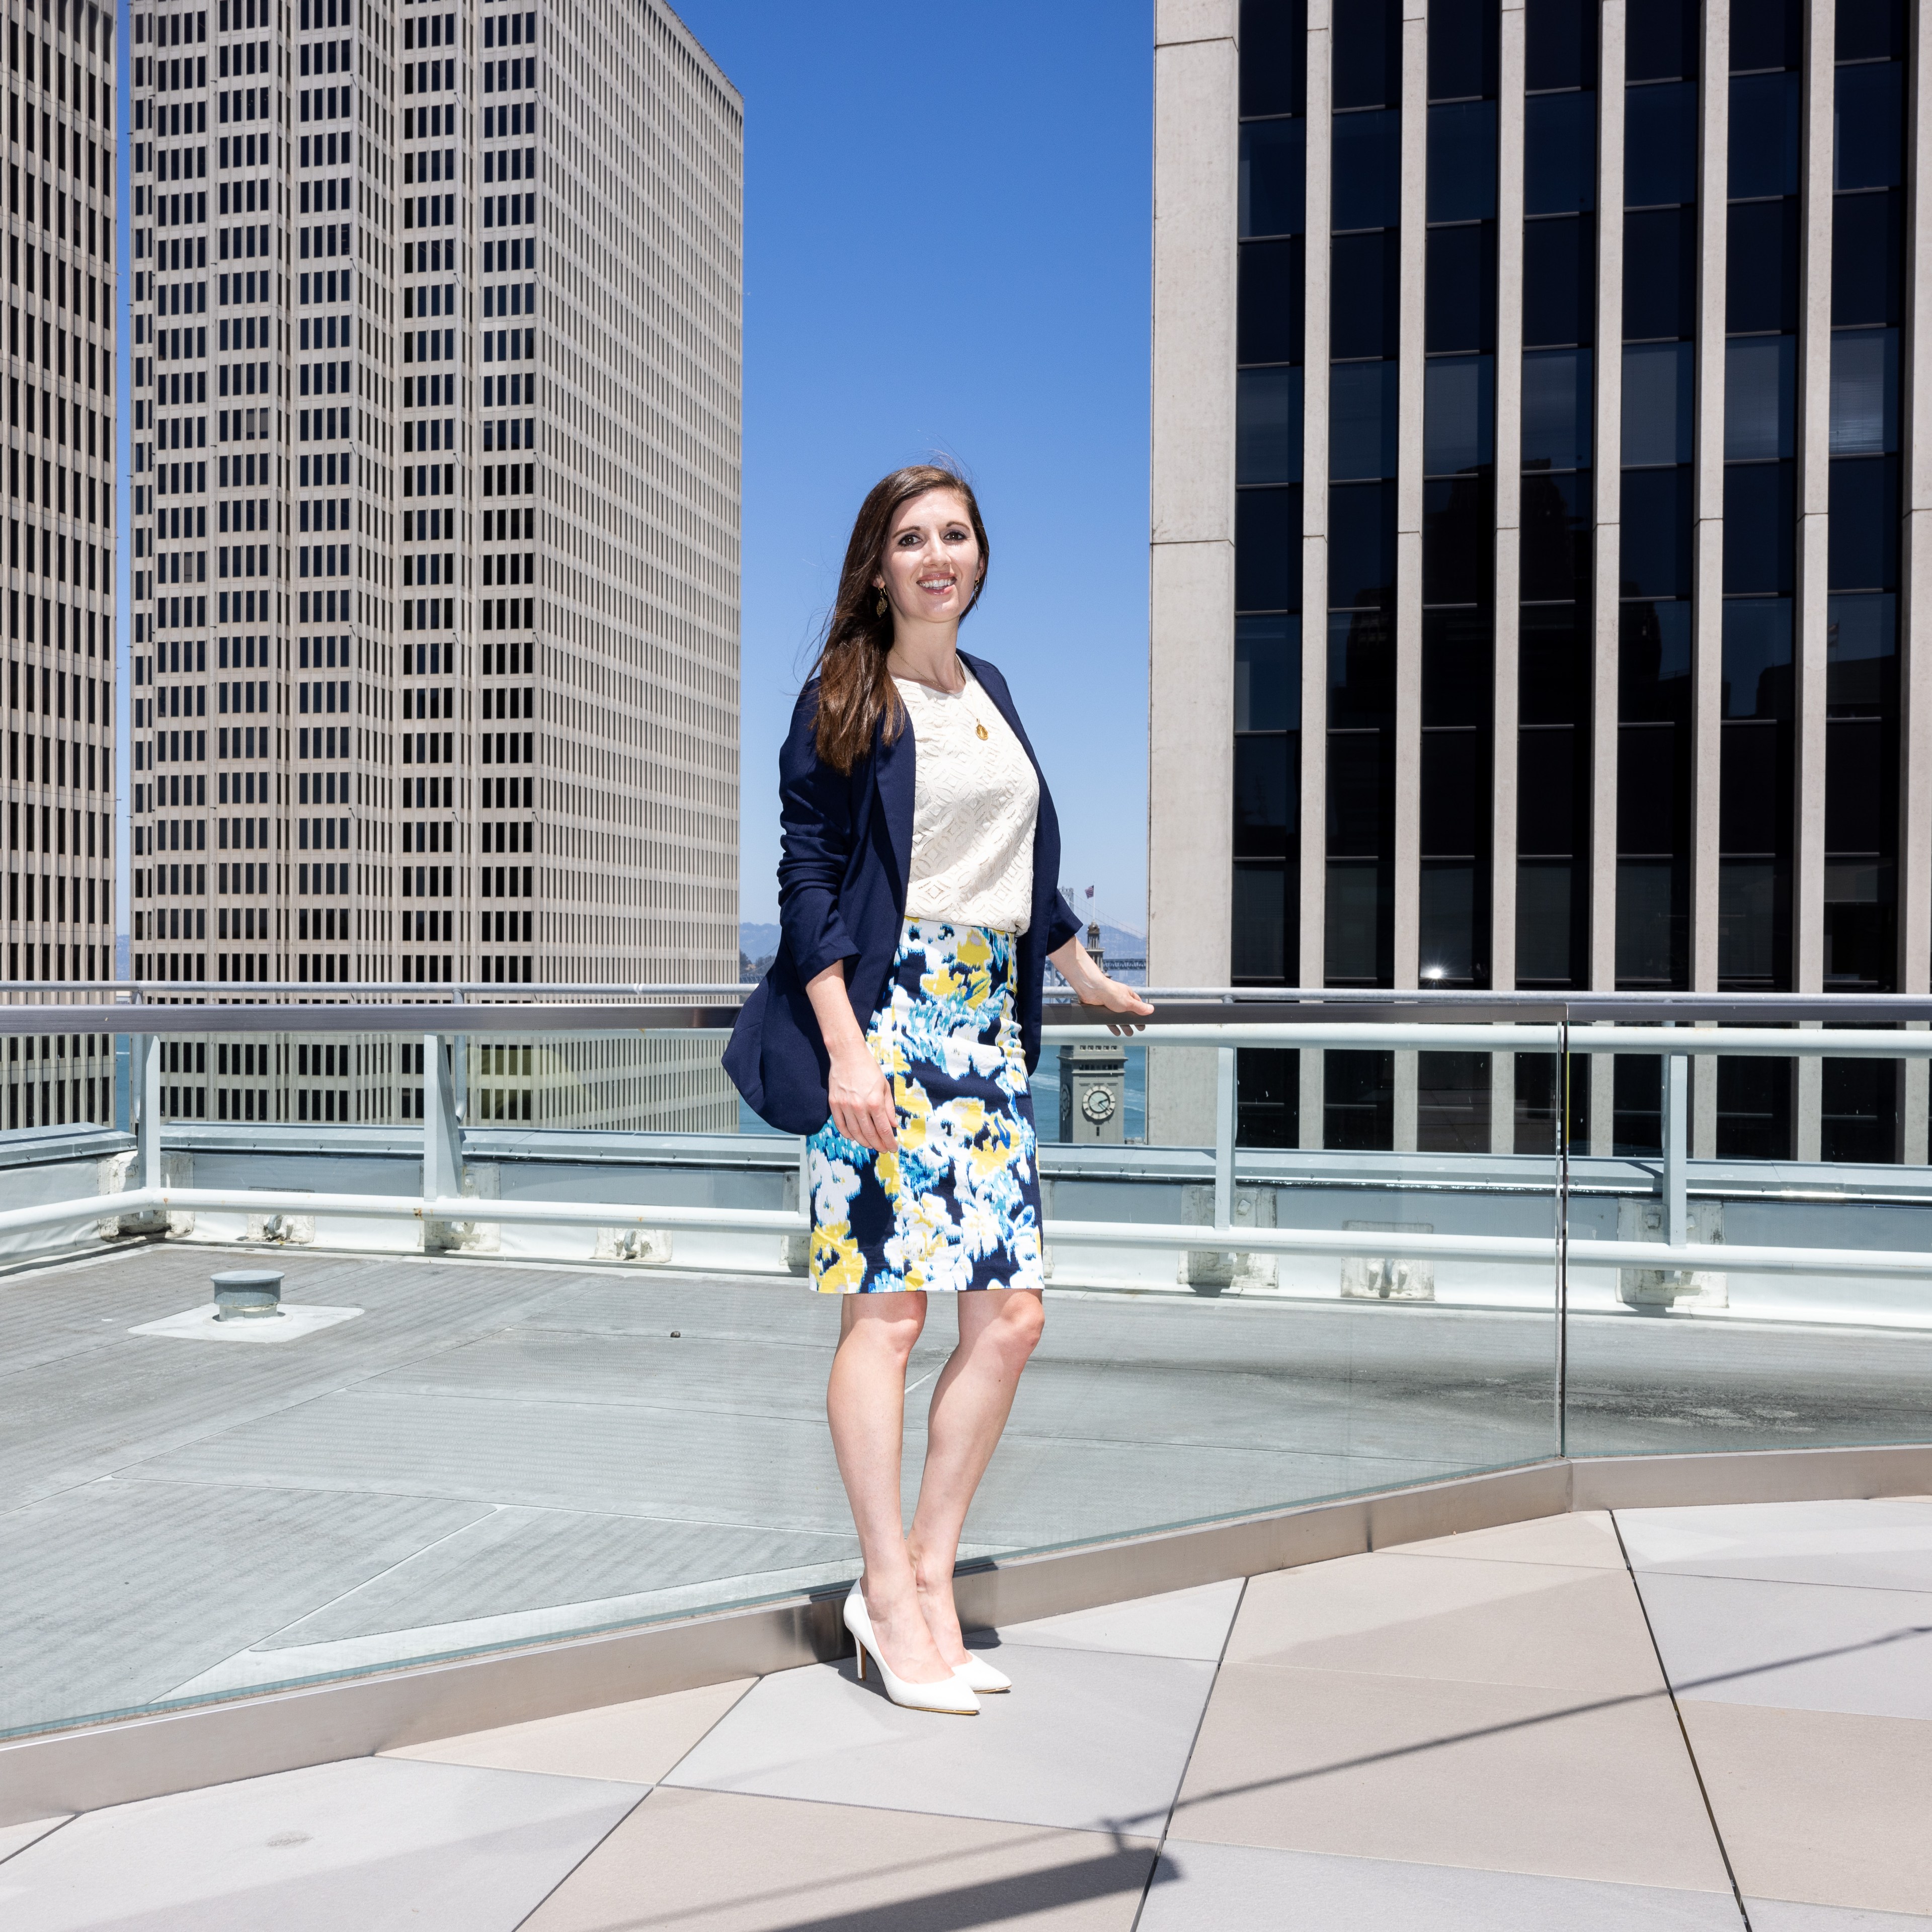 A woman stands on a rooftop, surrounded by tall buildings. She is dressed in a navy blazer, white blouse, a floral skirt, and white heels, smiling at the camera.